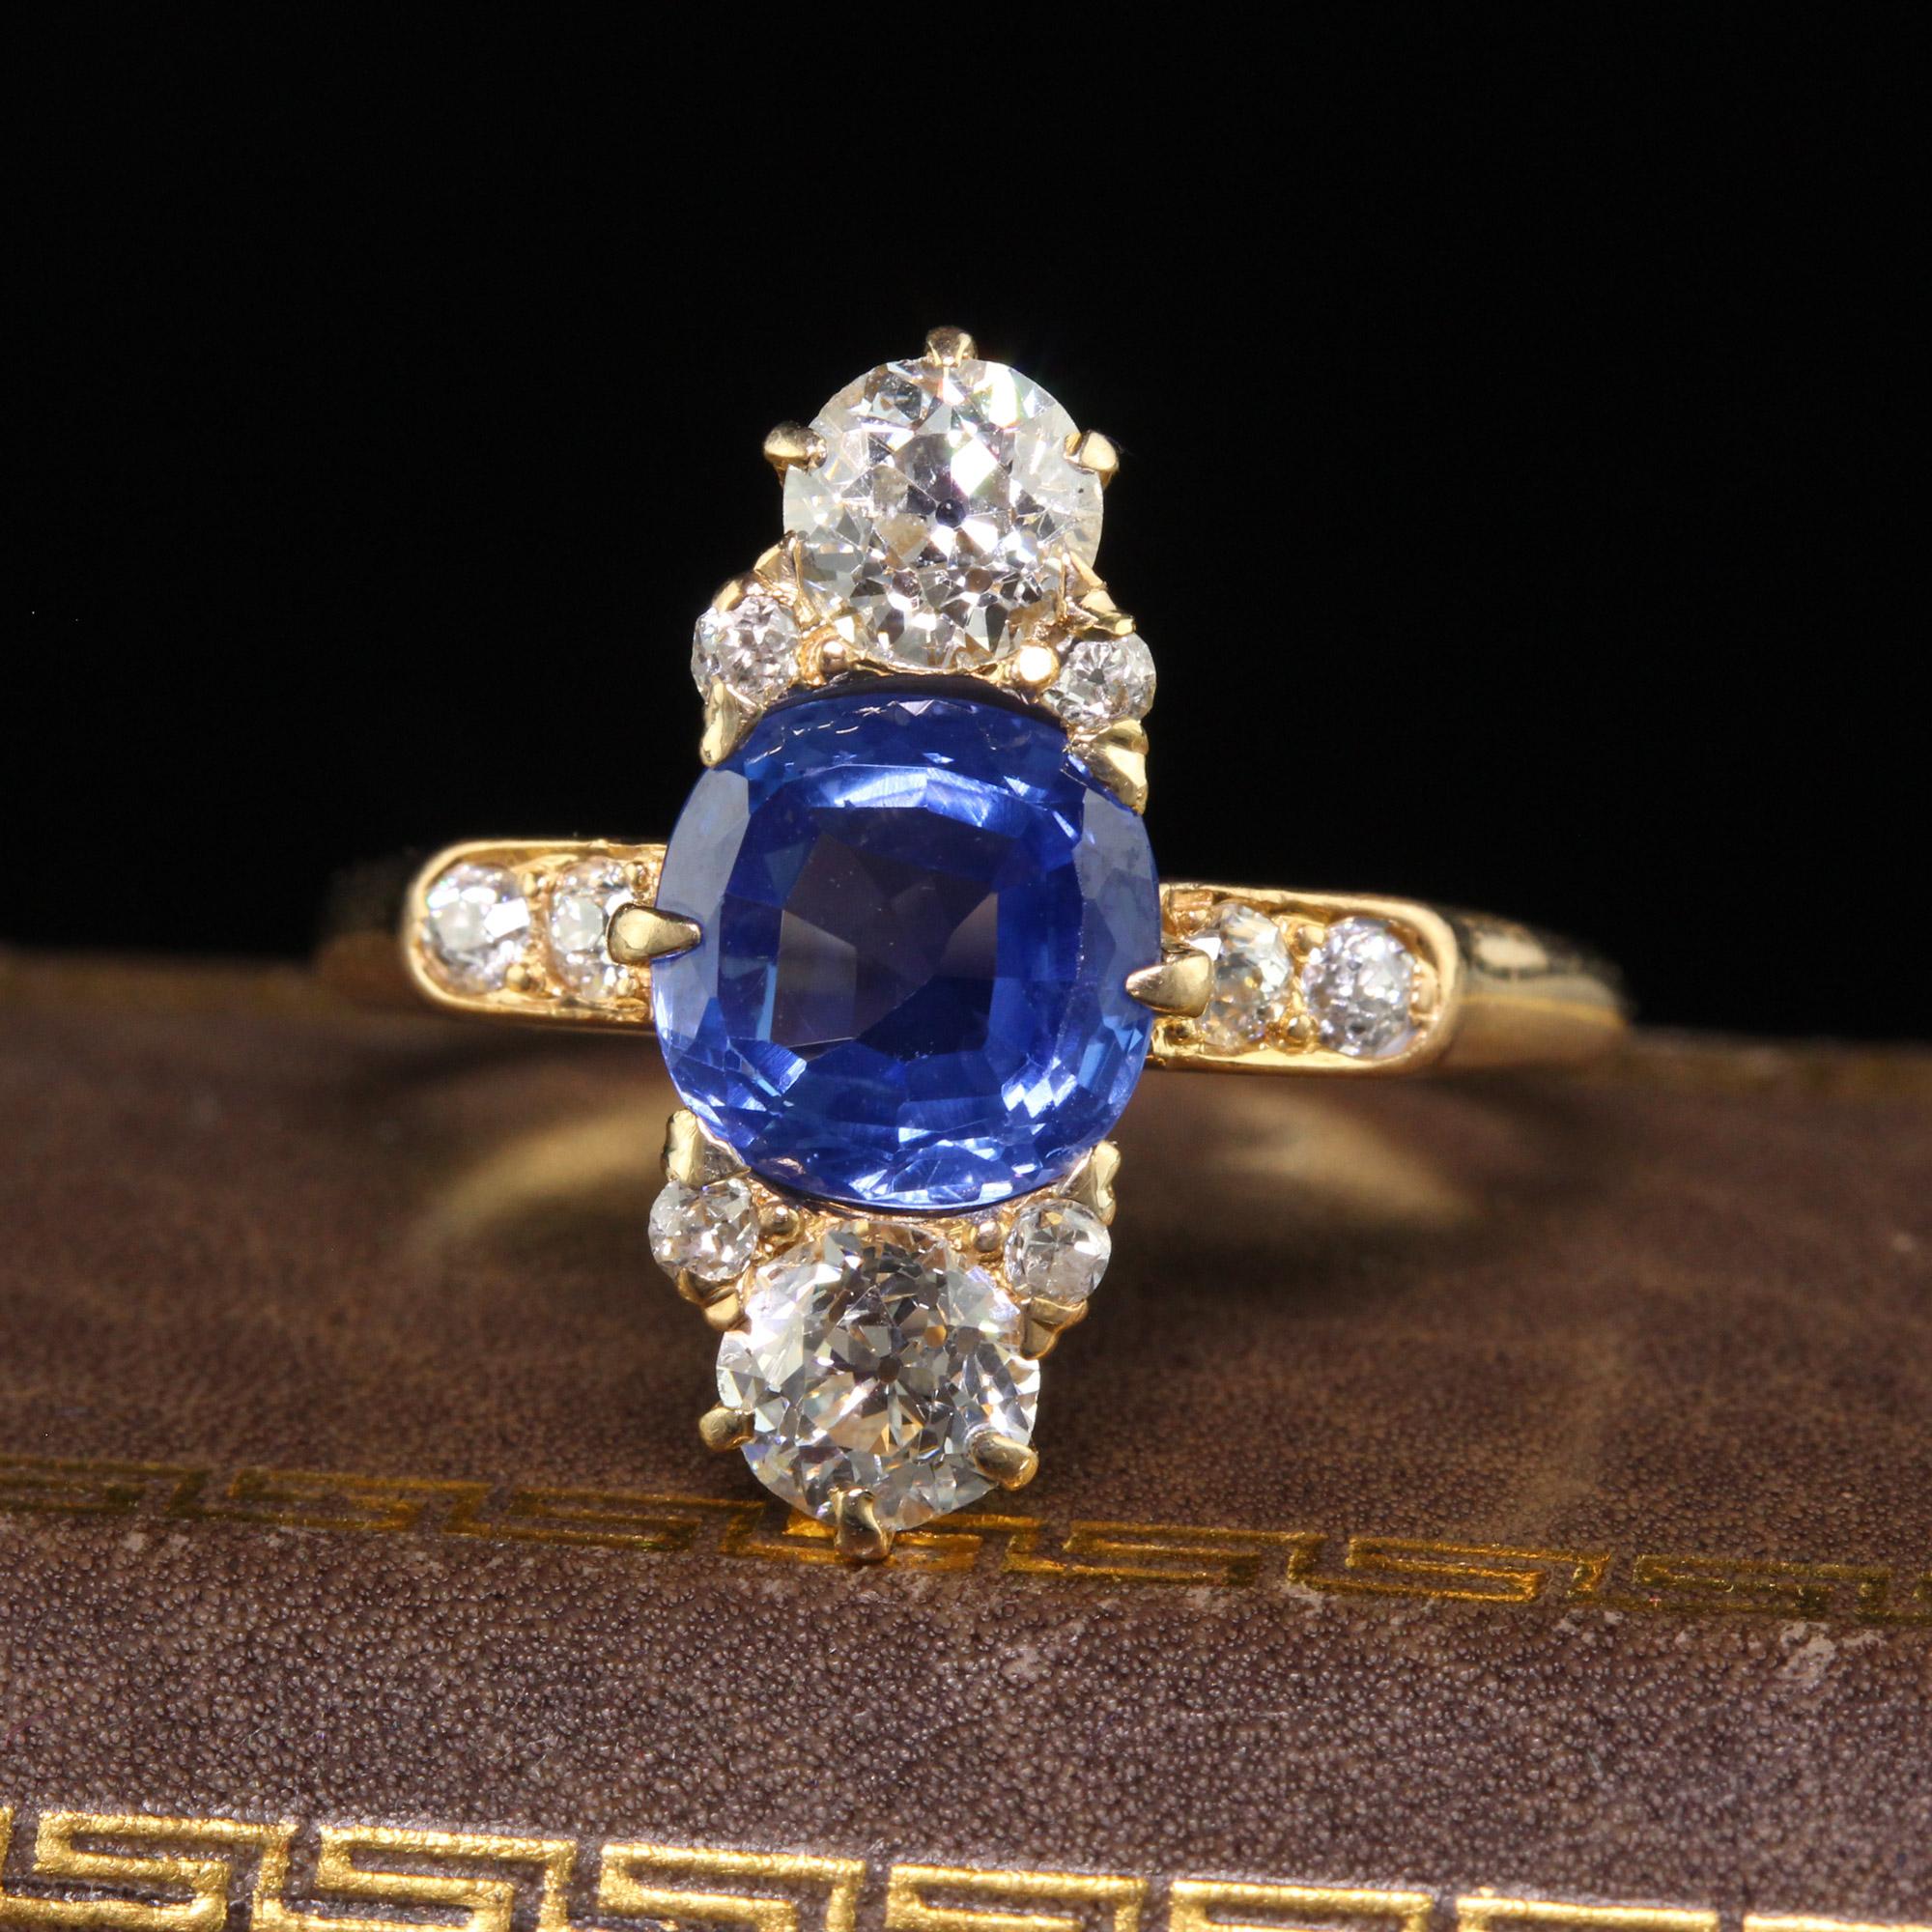 Beautiful Antique Art Deco Bailey Banks Biddle 18K Yellow Gold Sapphire Diamond Ring - GIA. This incredible Bailey Banks and Biddle sapphire and diamond ring is crafted in 18k yellow gold. The center holds a natural blue sapphire that has a GIA